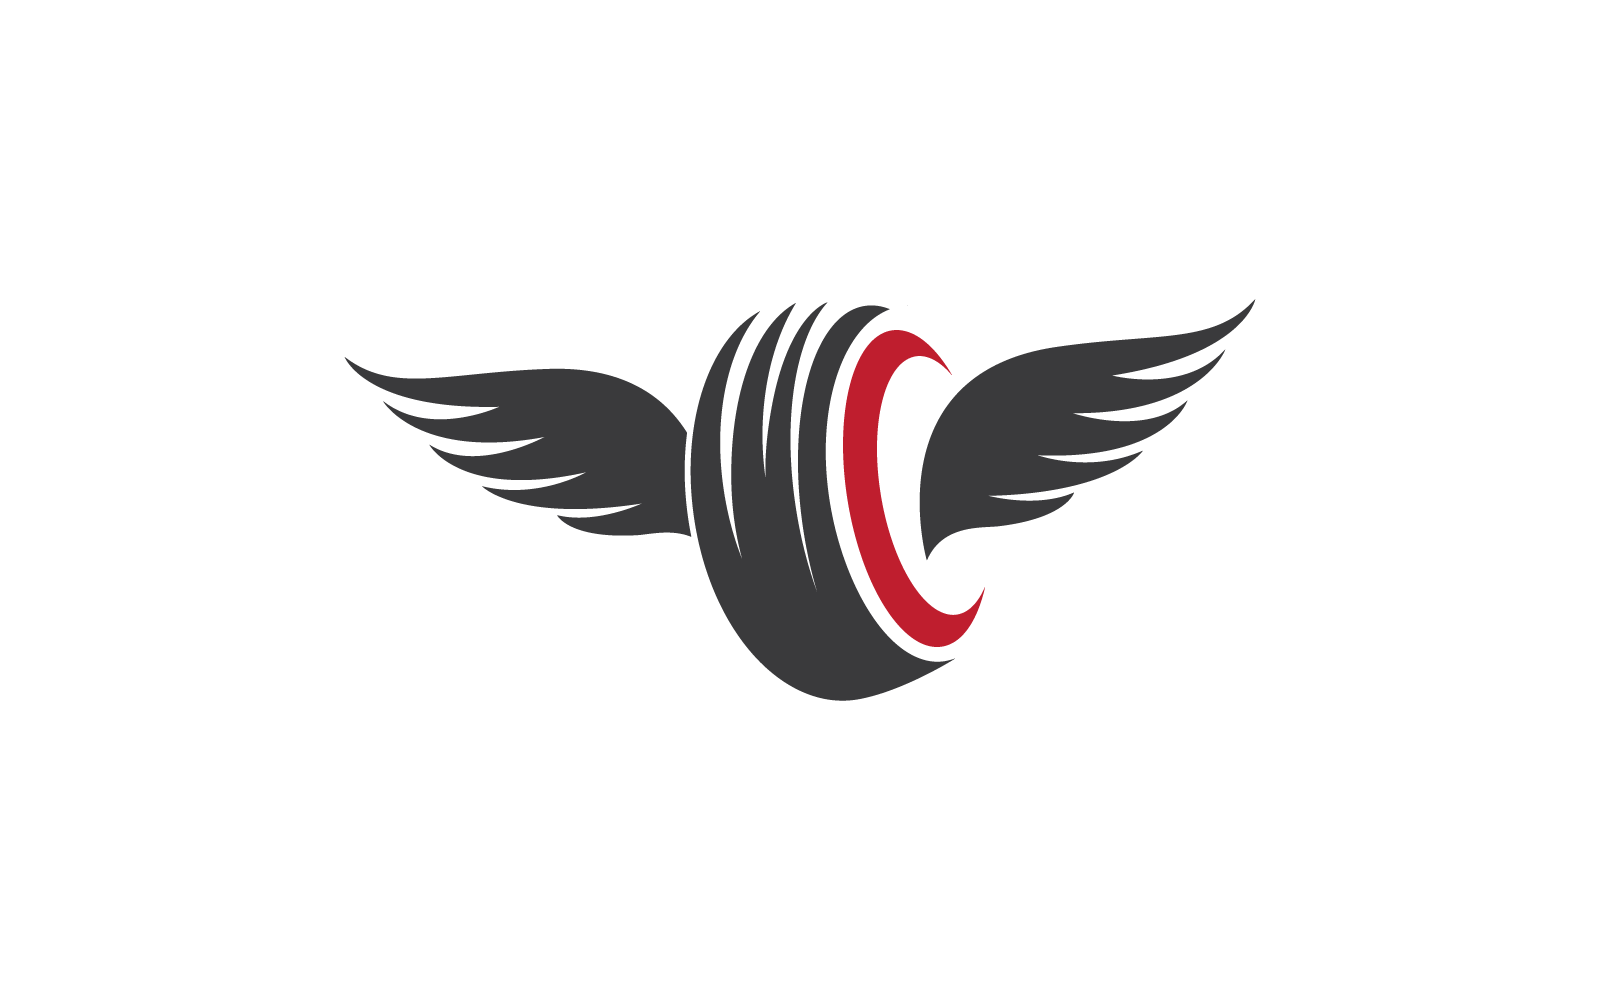 Tires and wing illustration vector logo template